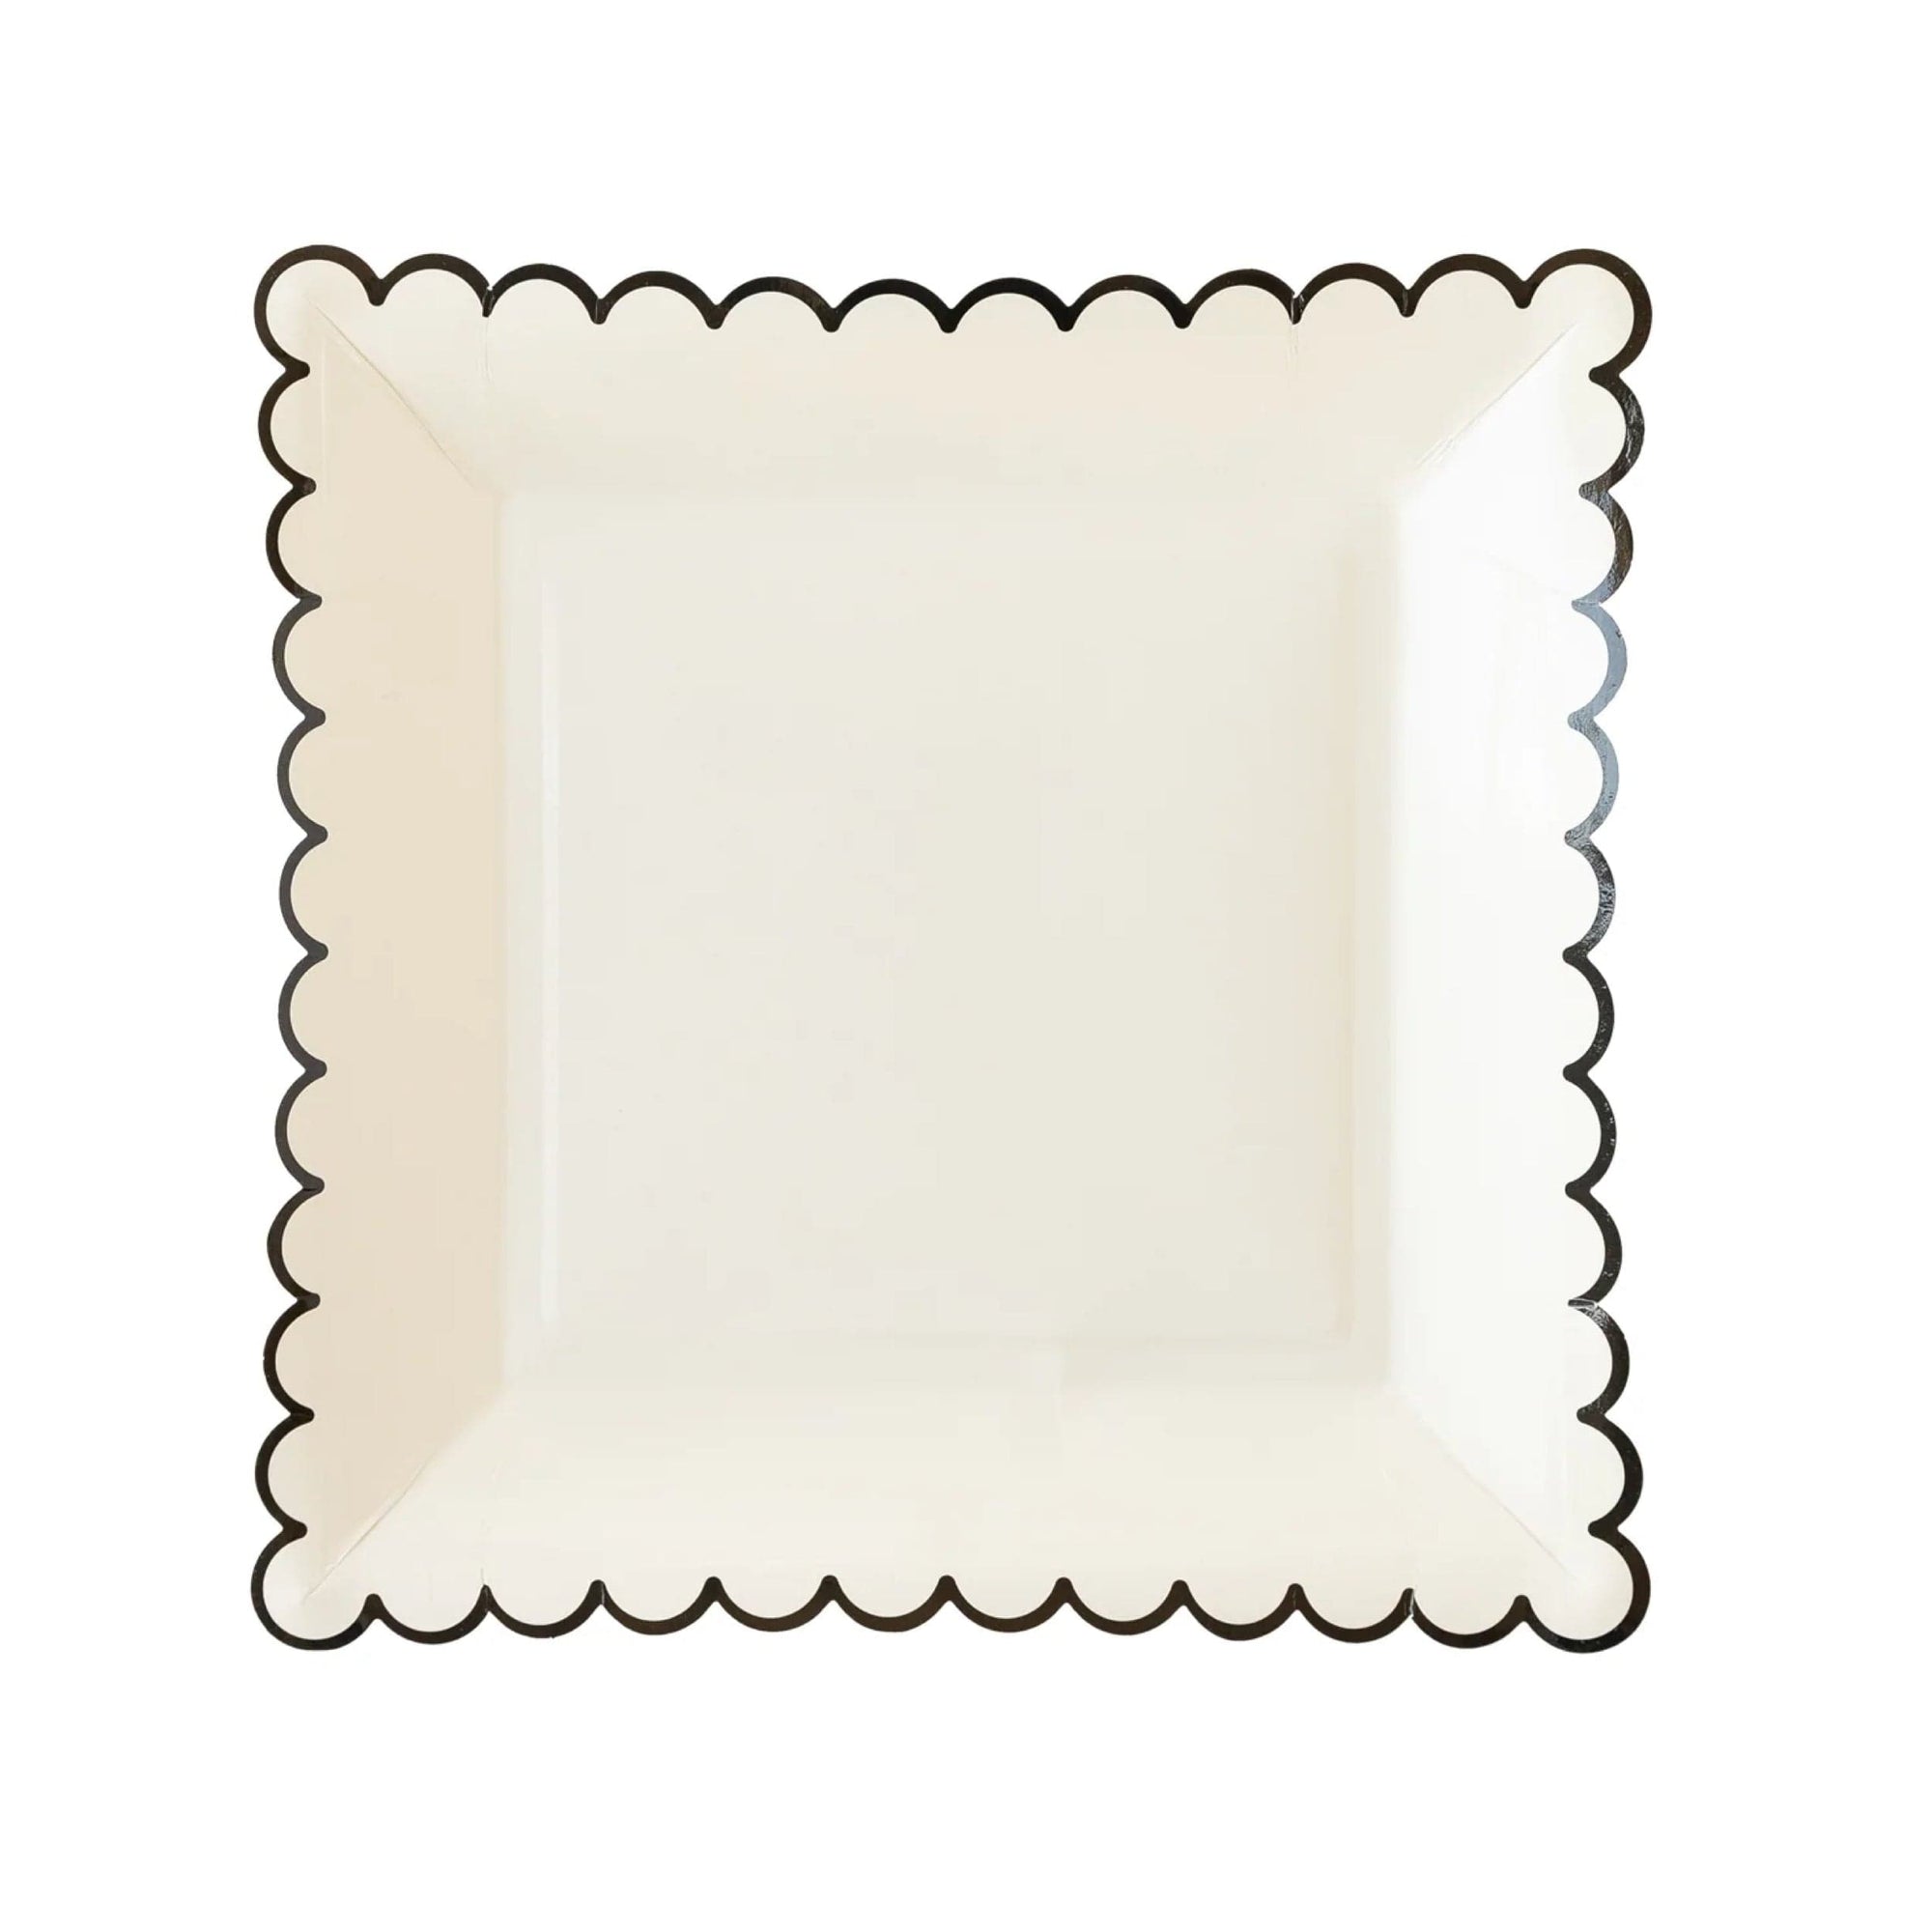 White With Black Scalloped Square Plates